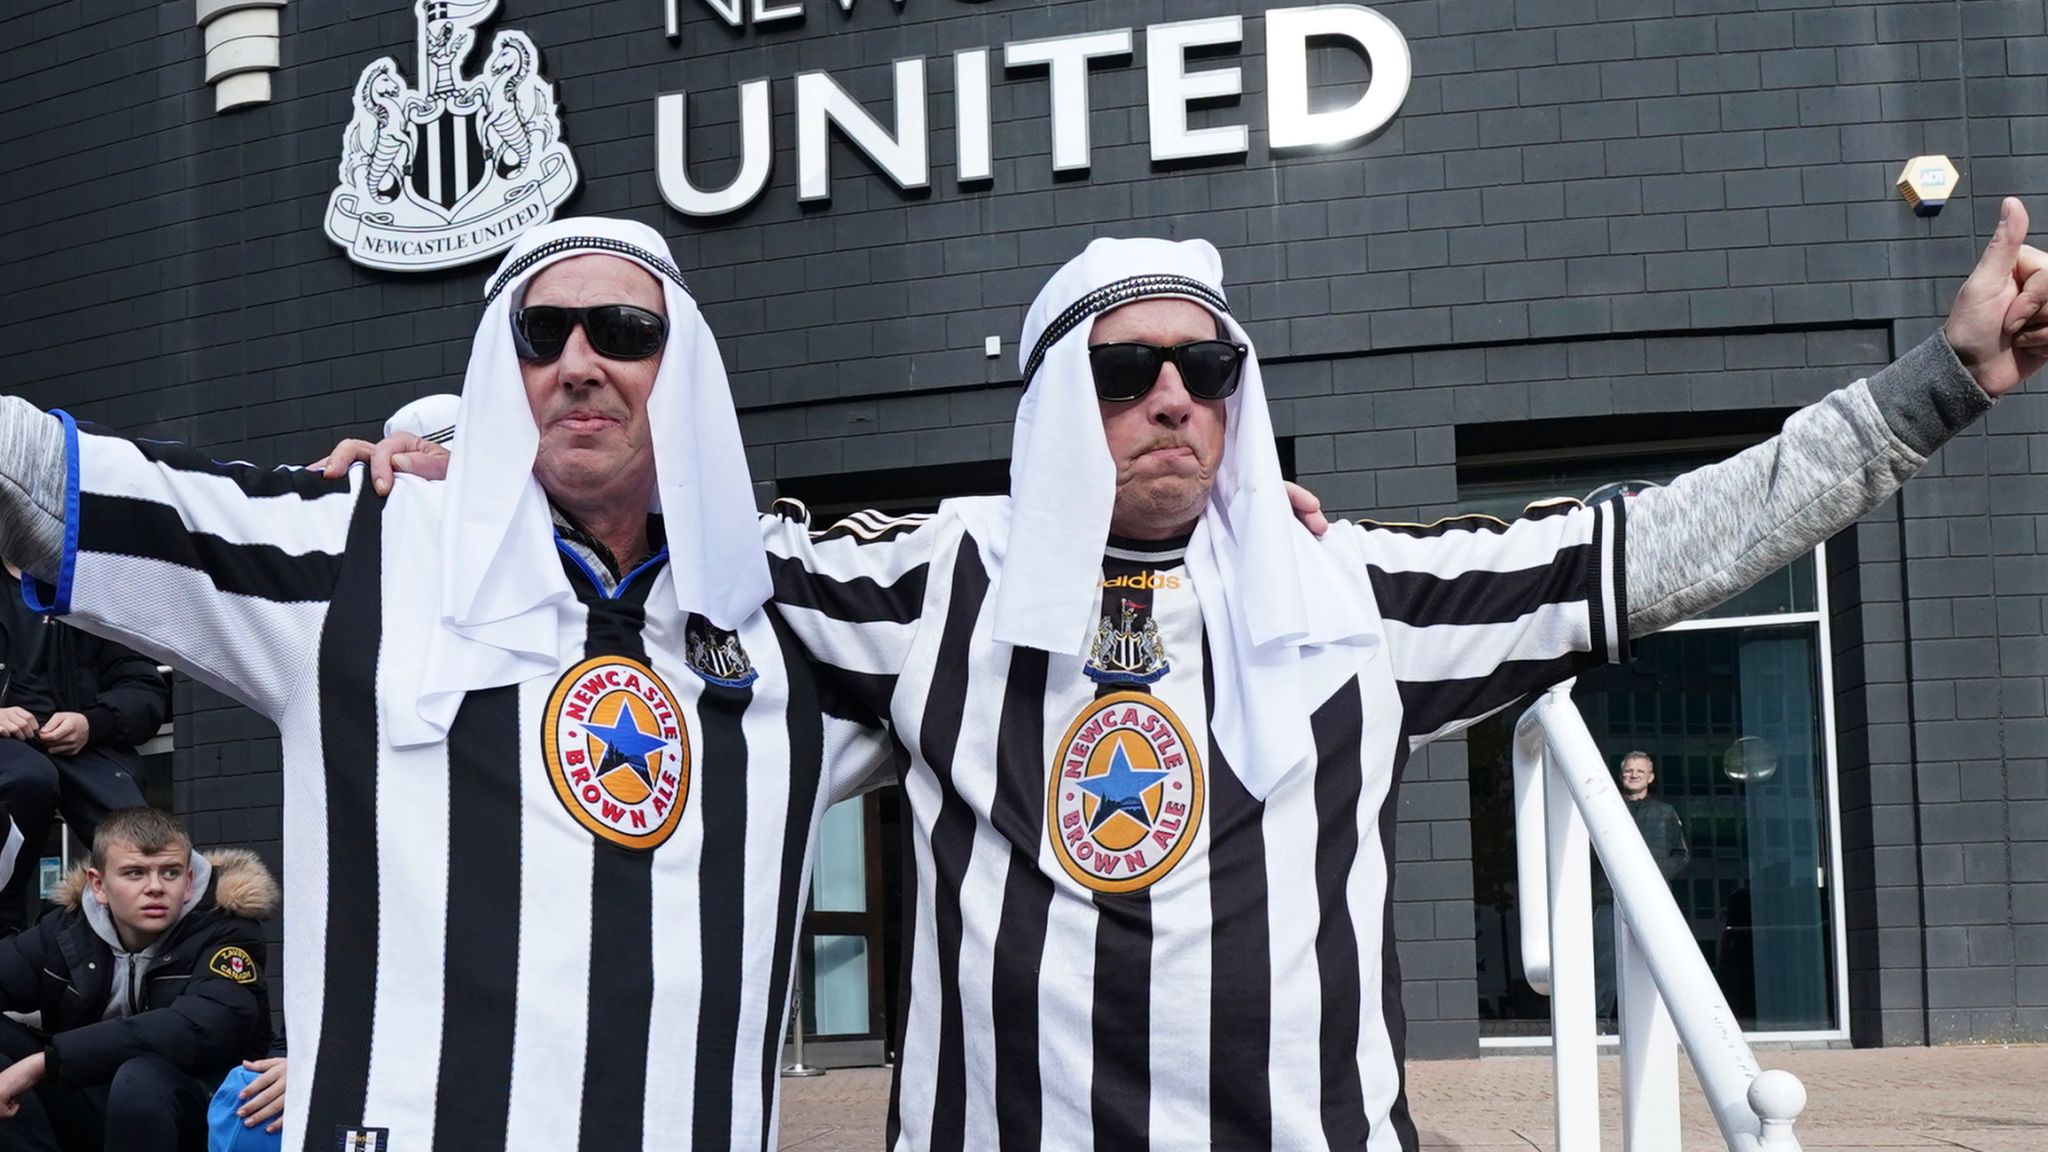 Newcastle ask to not wear Arab-style clothing matches following Saudi-backed | Football News | Sky Sports